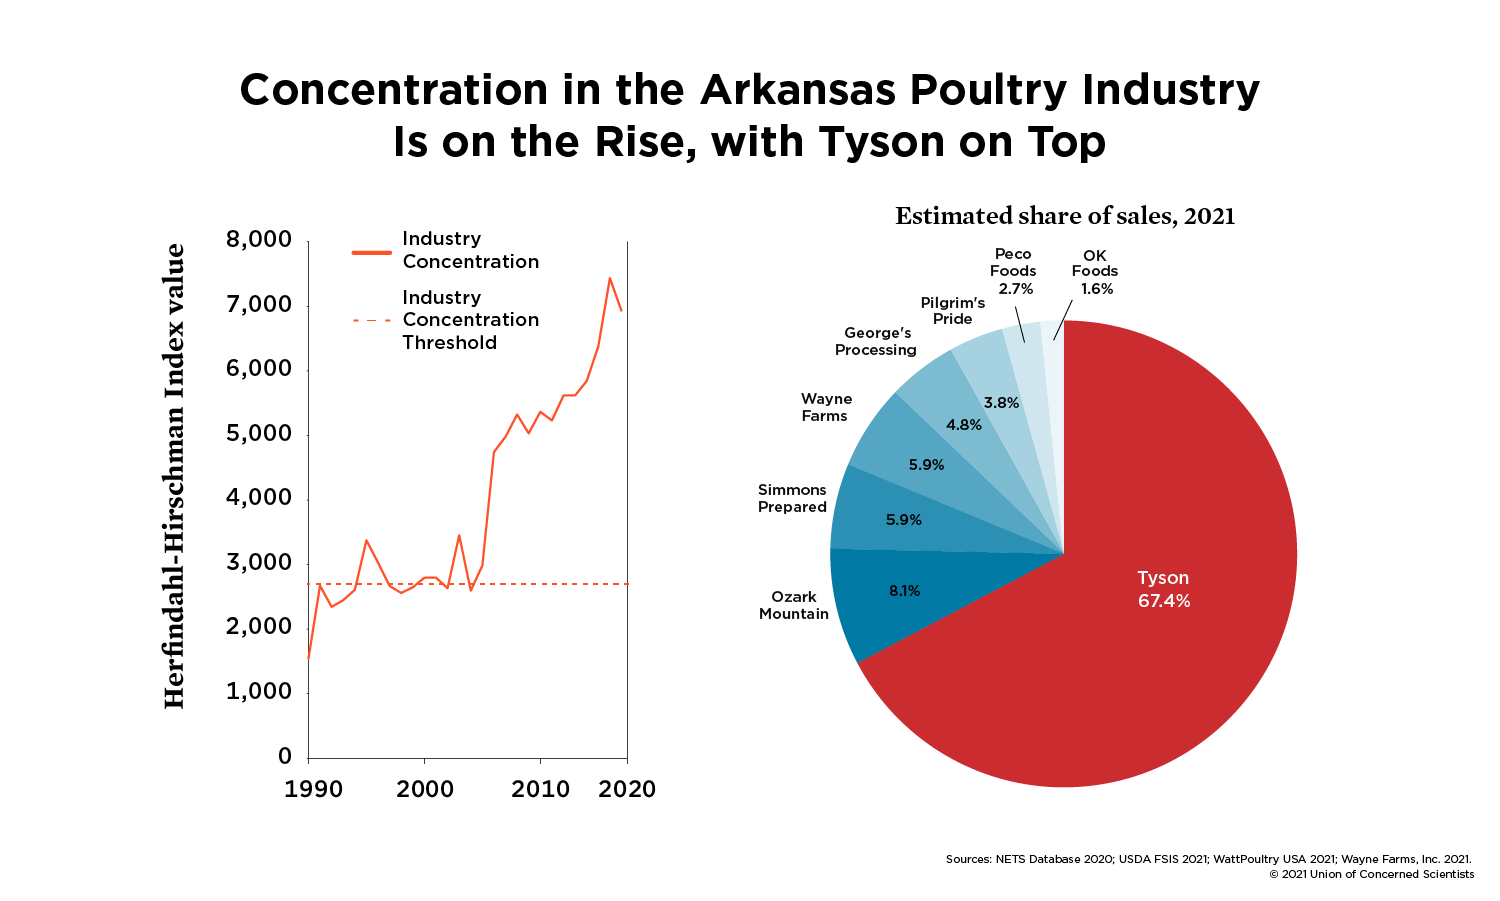 Charts showing concentration in the Arkansas poultry processing industry 